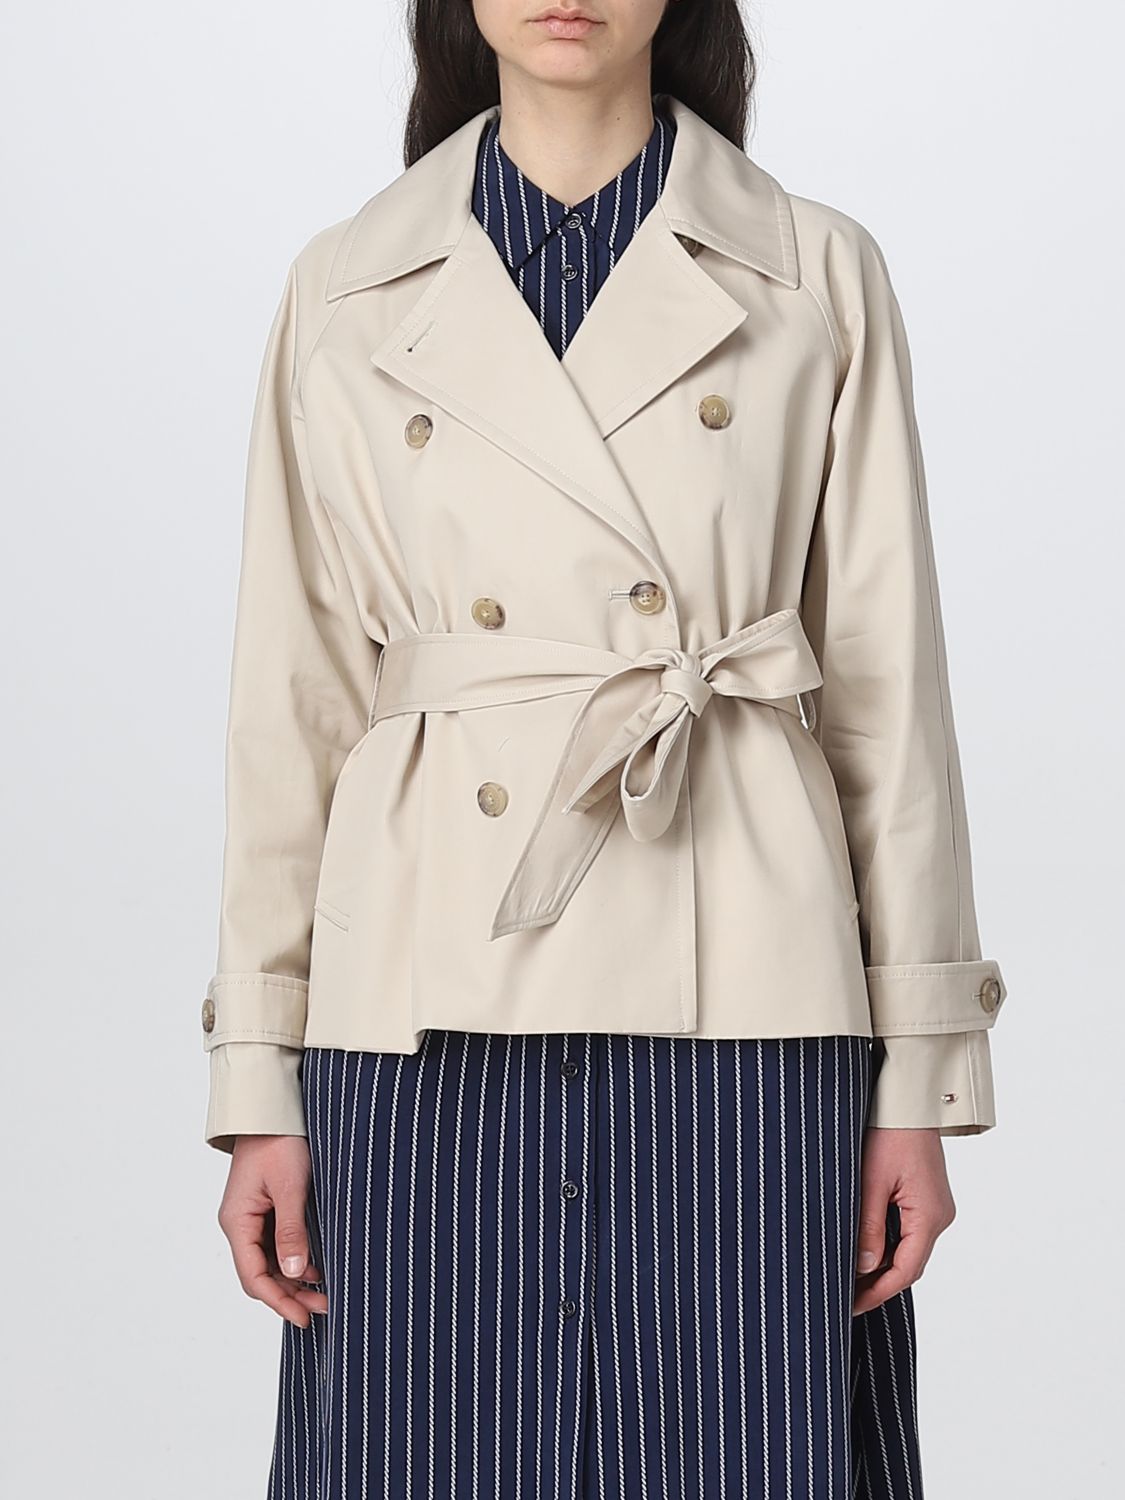 TOMMY HILFIGER: trench coat for woman - Beige | Tommy Hilfiger trench coat WW0WW38430 online GIGLIO.COM